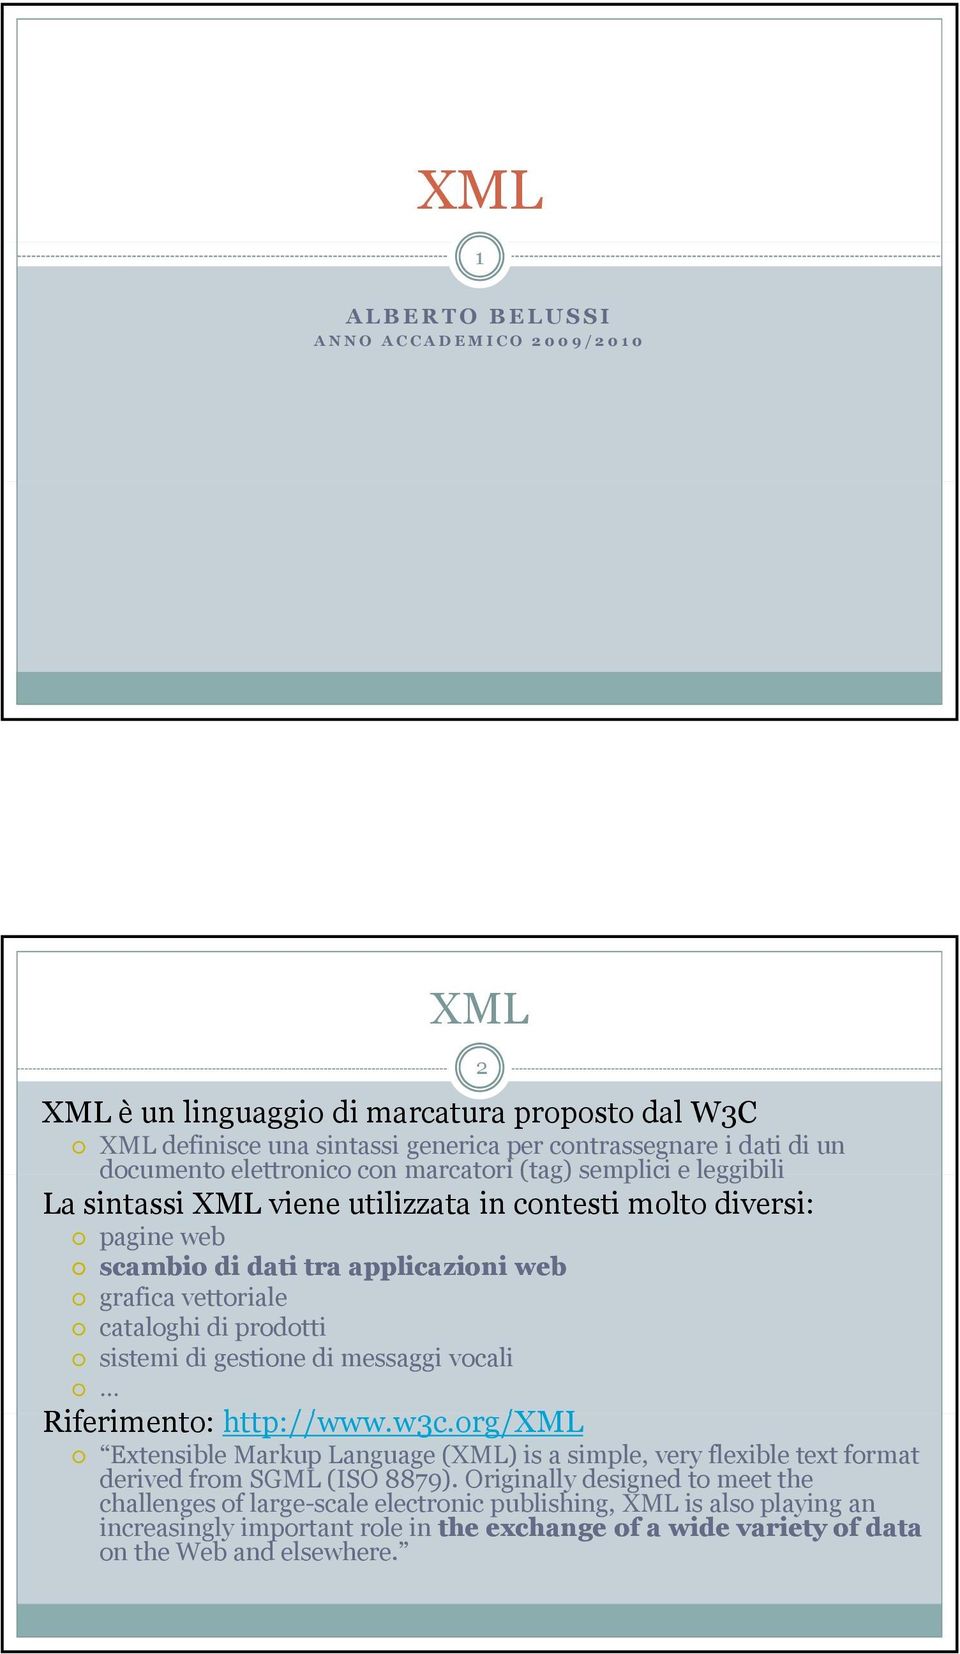 sistemi di gestione di messaggi vocali Riferimento: i http://www.w3c.org/xml /XML 2 Extensible Markup Language (XML) is a simple, very flexible text format derived from SGML (ISO 8879).